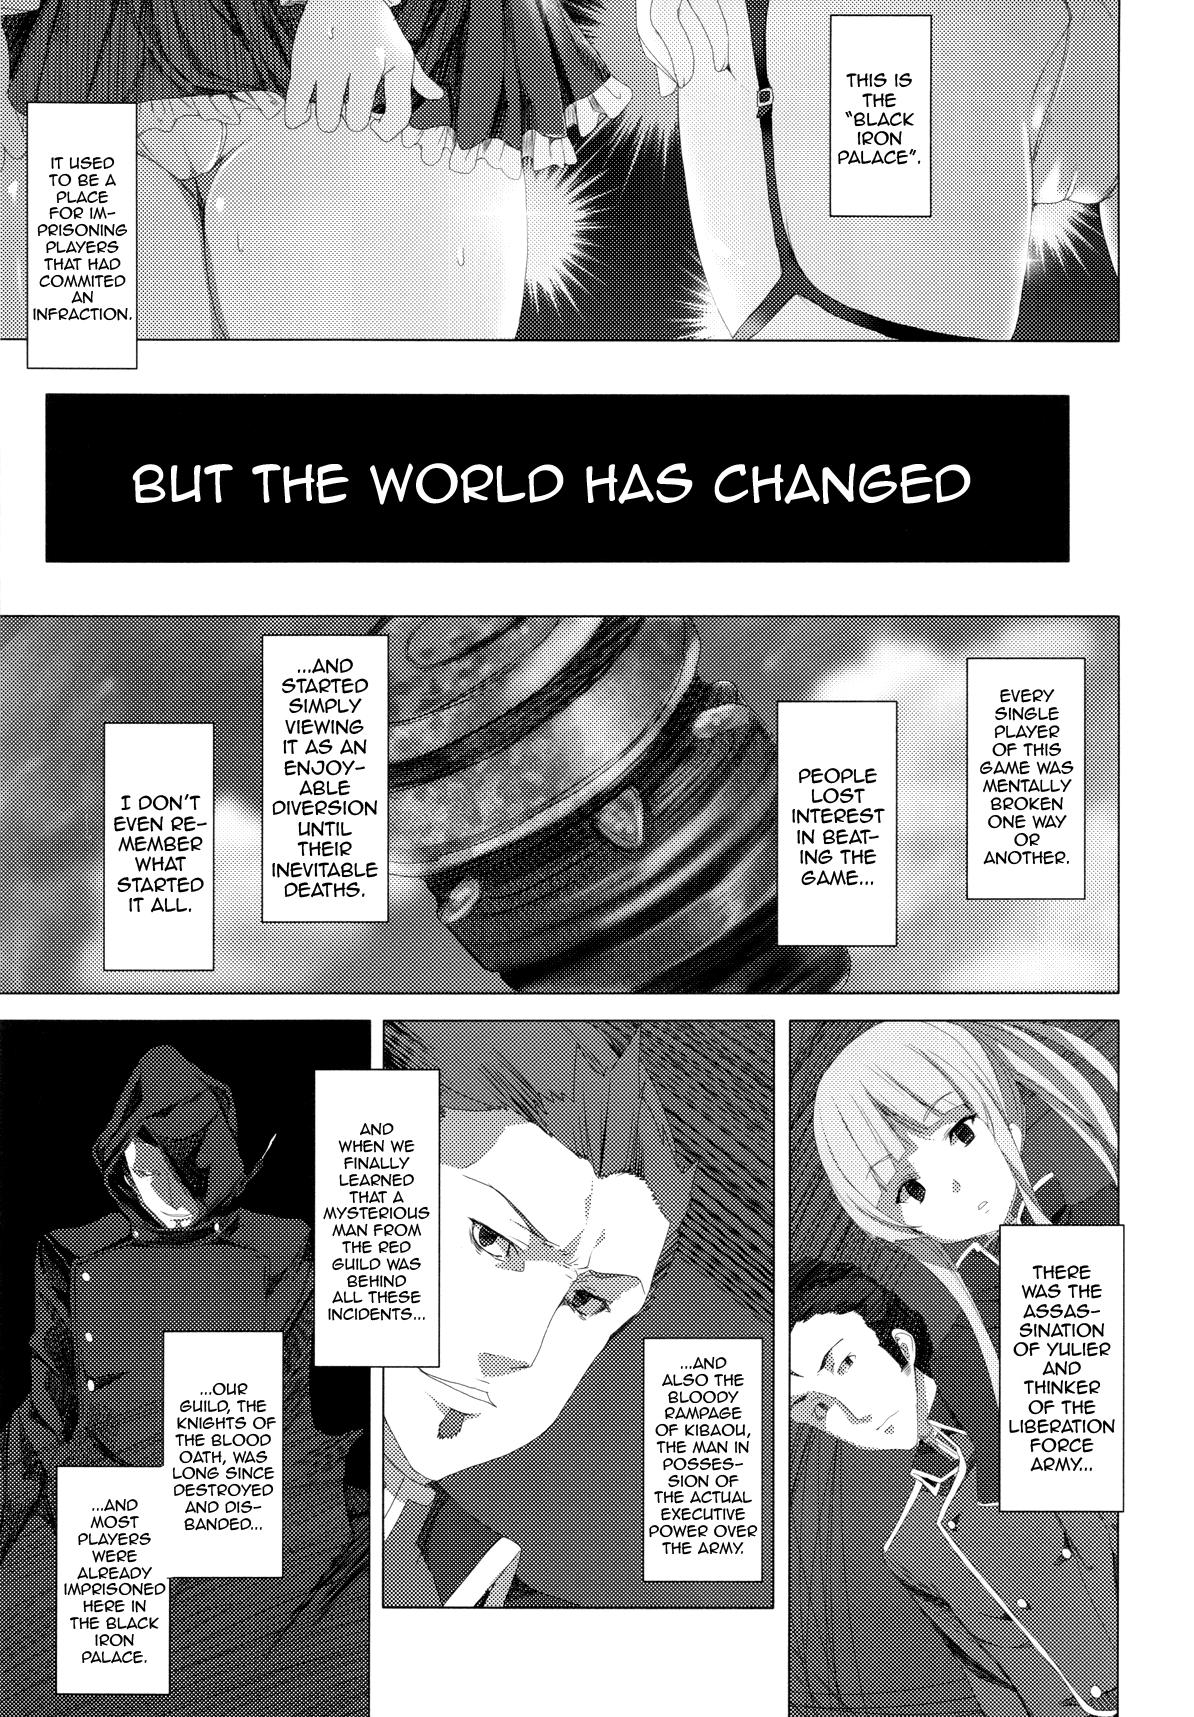 Long WRONG WORLD - Sword art online Shemale - Page 7